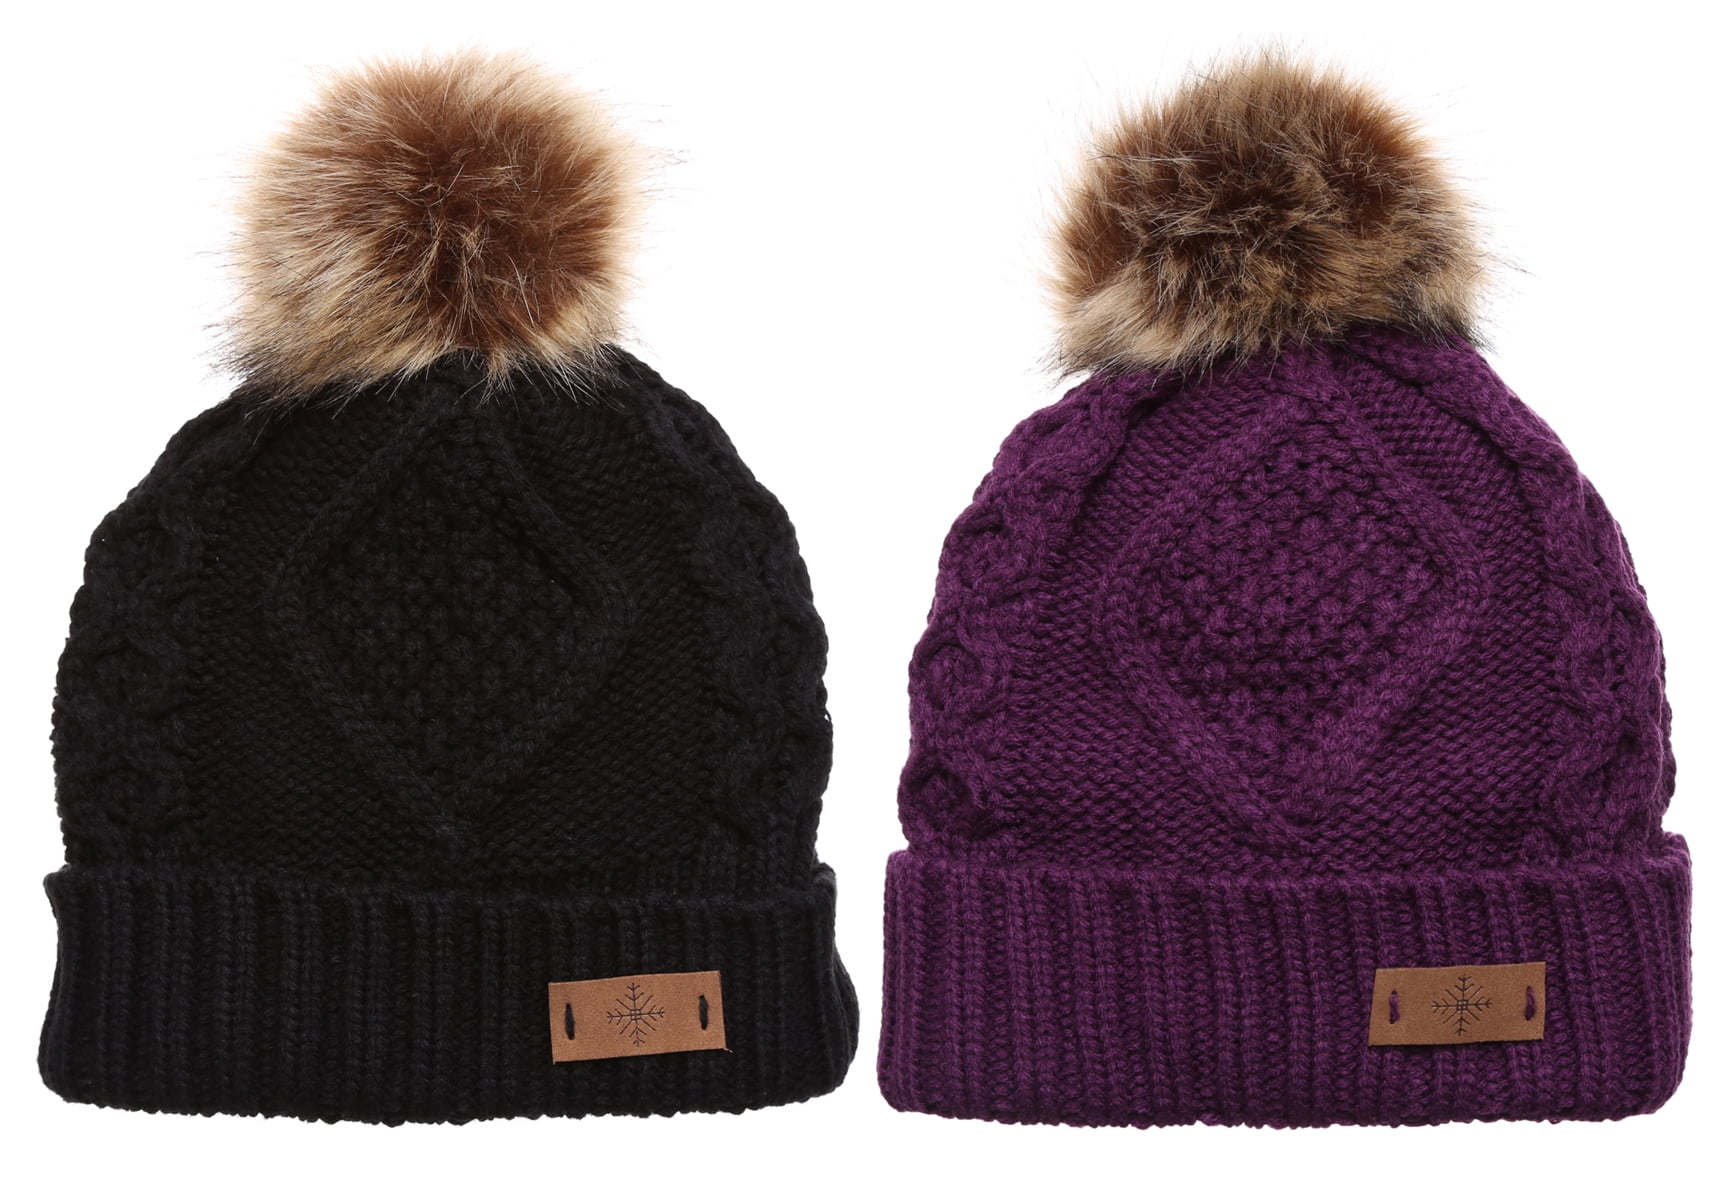 MIRMARU Winter Oversized Cable Knitted Pom Pom Beanie Hat with Fleece Lining. 